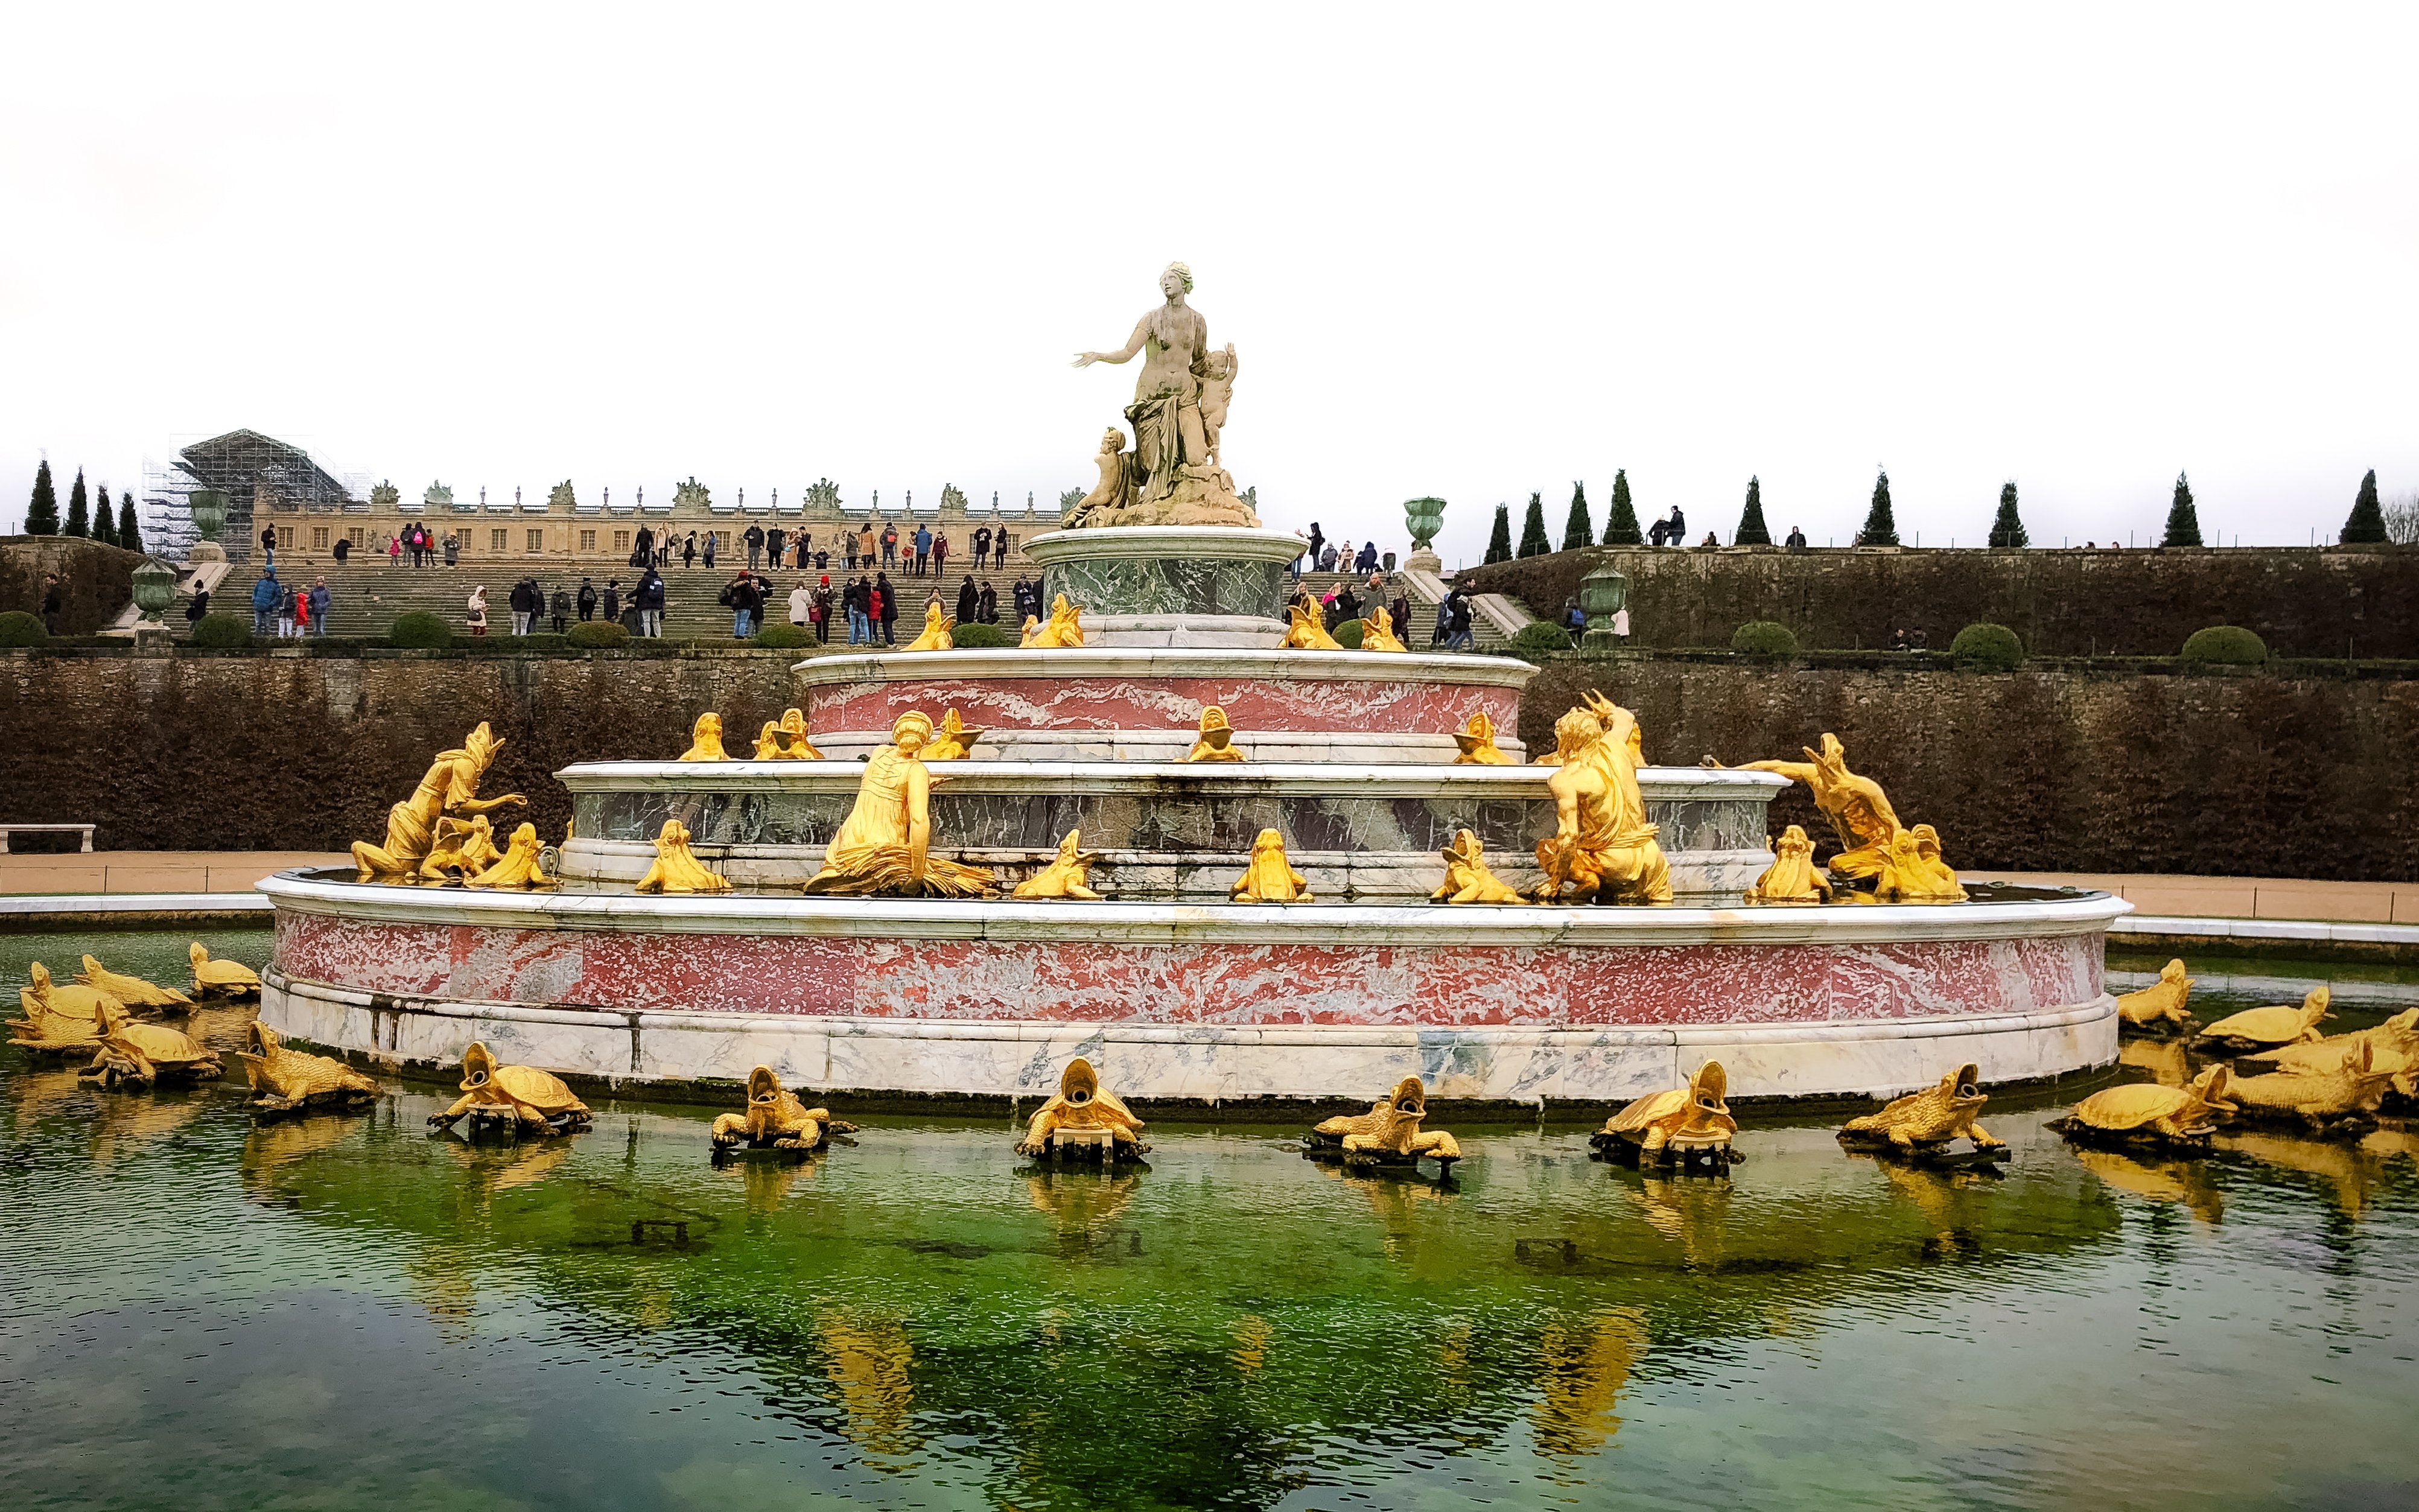 Fountains in the garden of Palace of Versailles